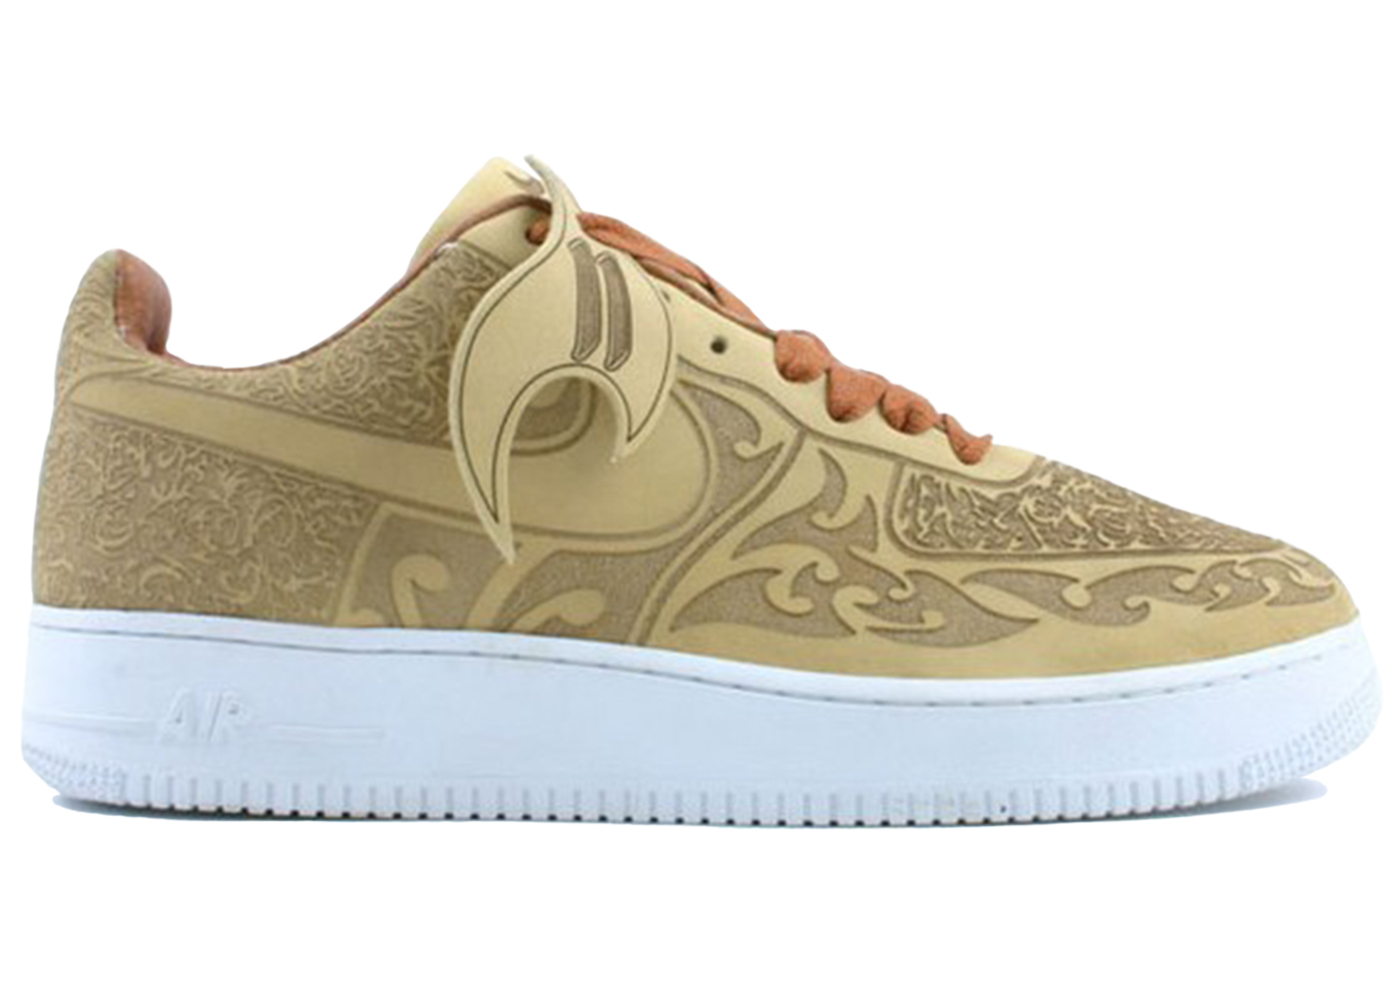 air force 1 laser